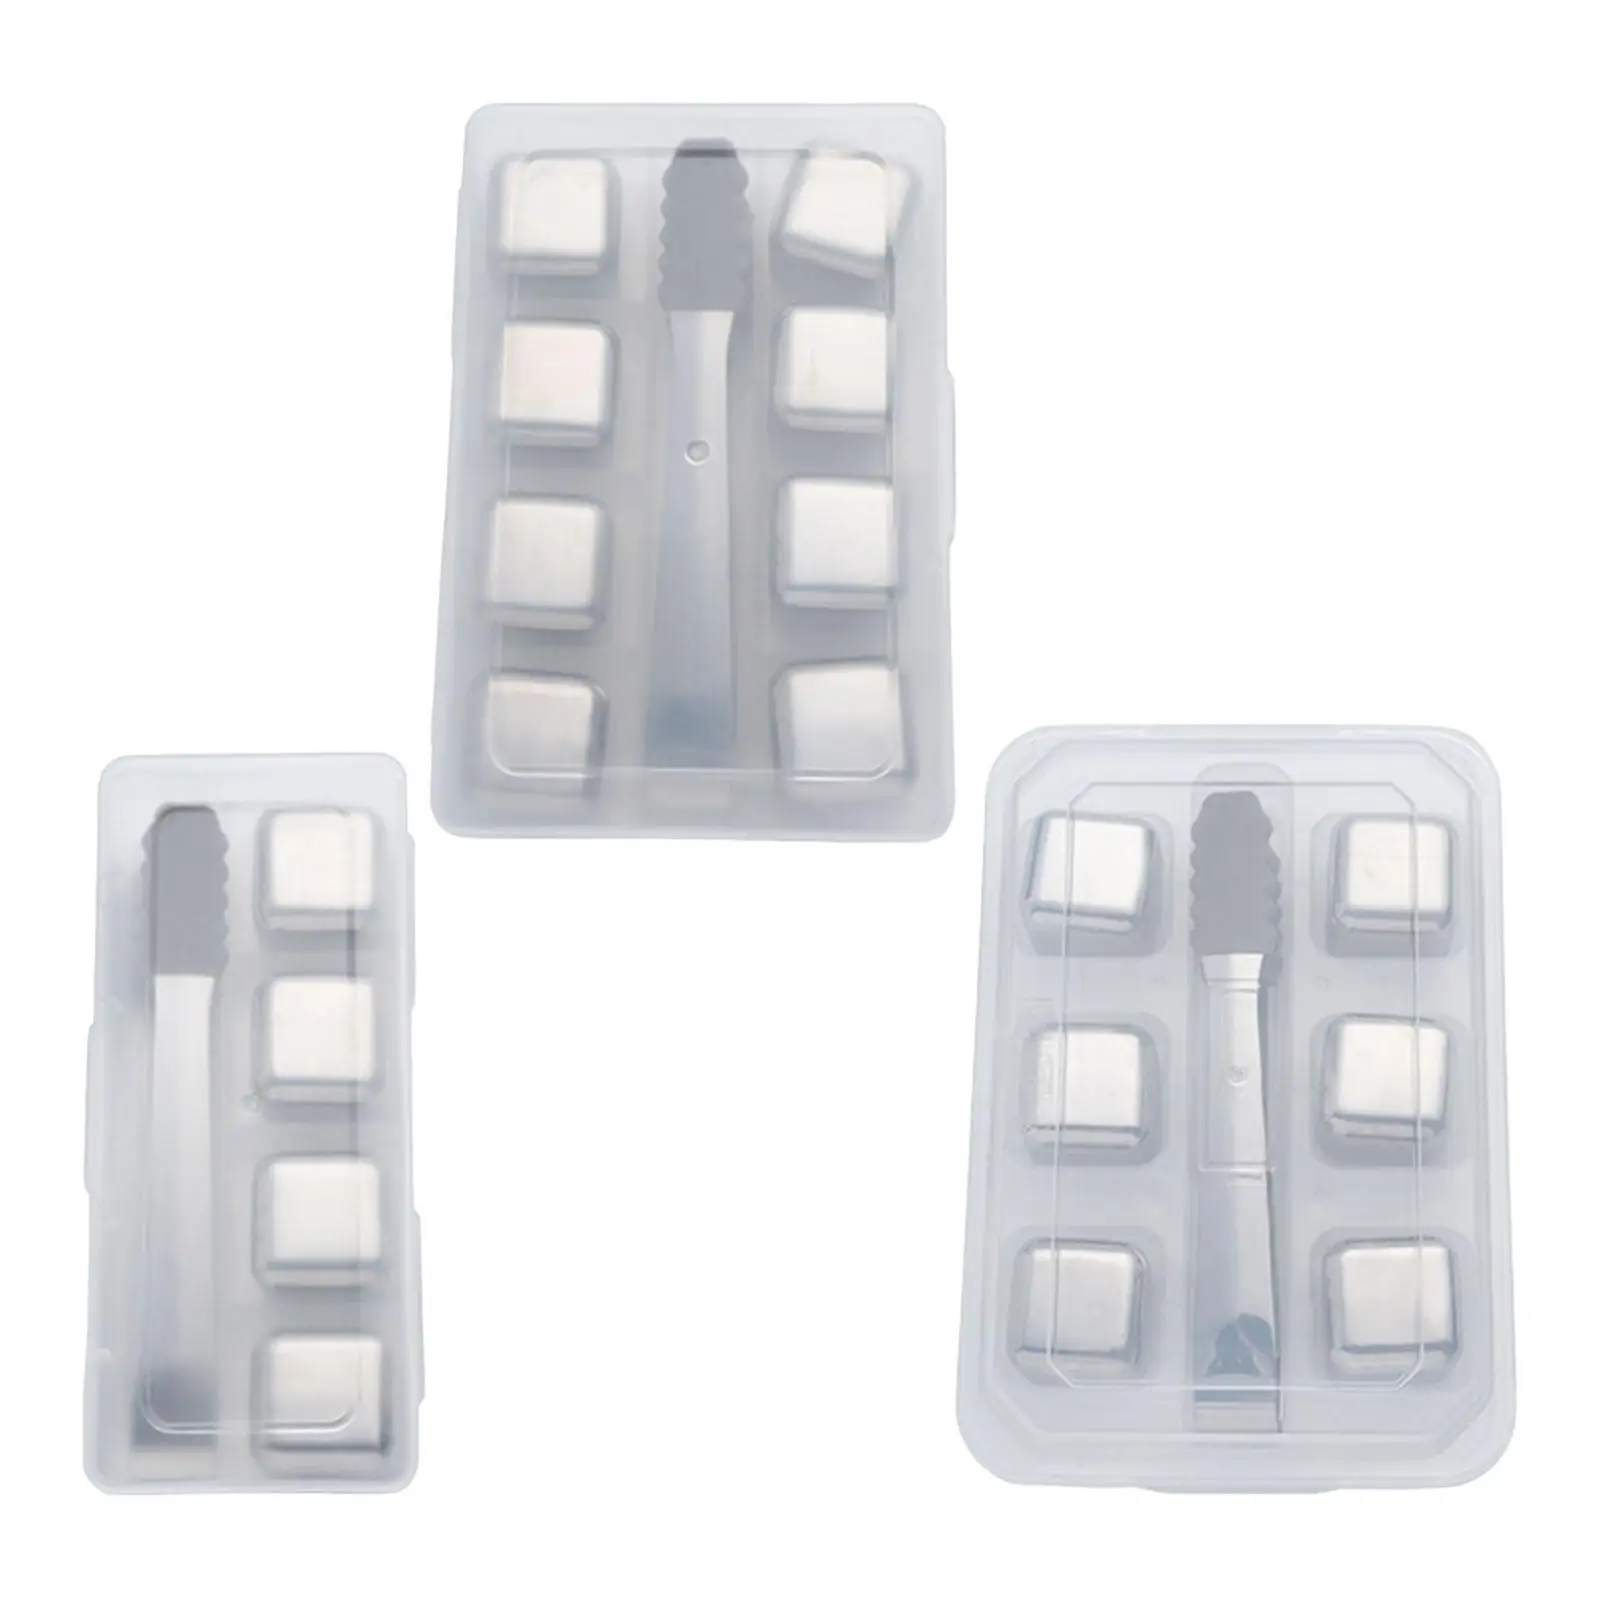 Stainless Steel Ice Cubes Reusable 2.5cm Cooling Cube Drinks Chilling Stones for Beverage Cocktail Party Home